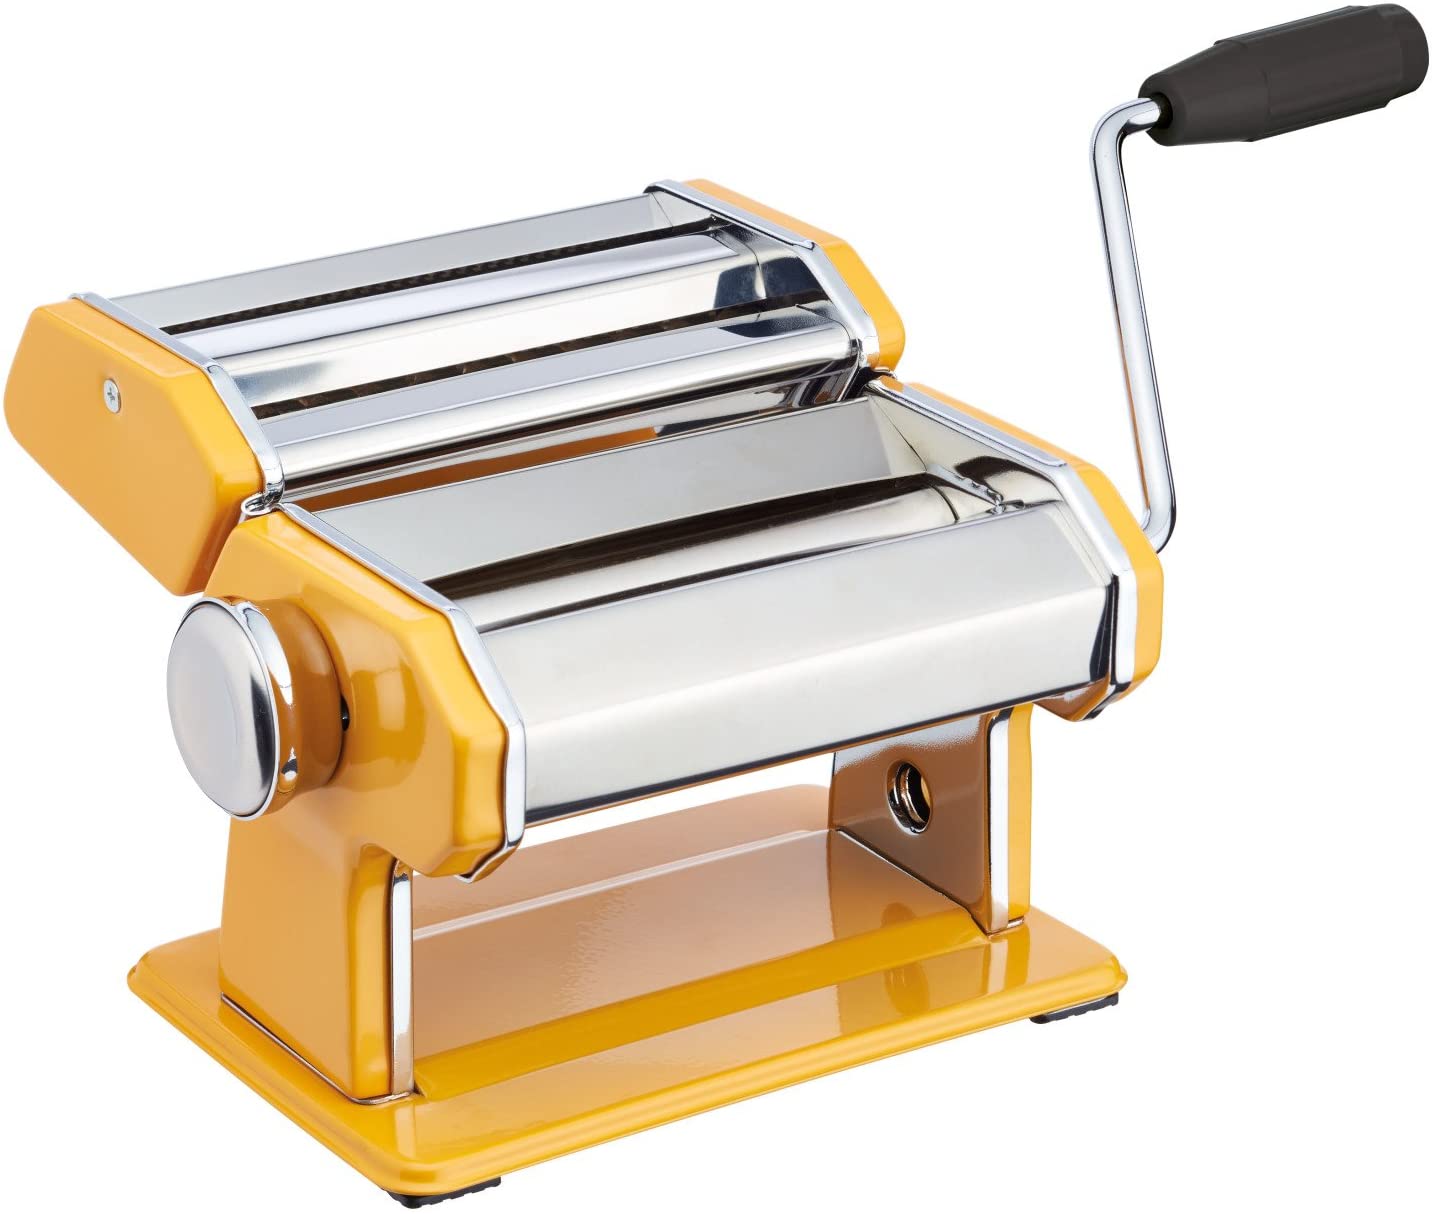 WORLD OF FLAVOURS KitchenCraft Stainless Steel Pasta Rolling Machine, Yellow, Stainless Steel, 1 x 1 x 1 cm